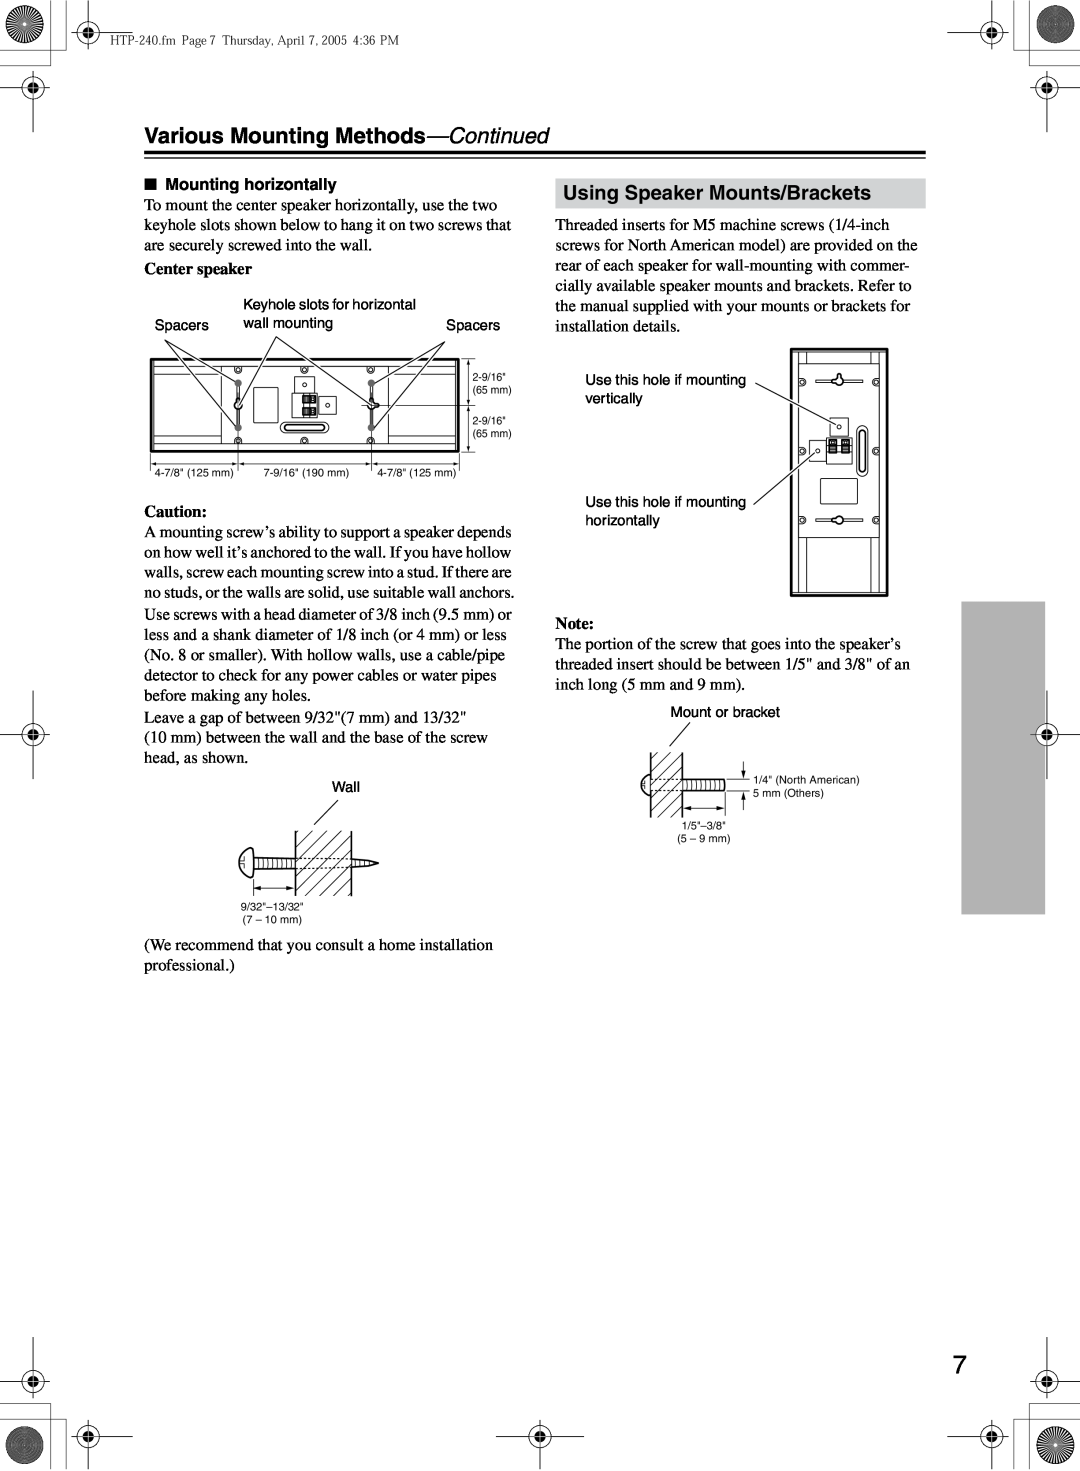 Onkyo HTP-240, SKS-HT240 instruction manual Various Mounting Methods-Continued, Using Speaker Mounts/Brackets 